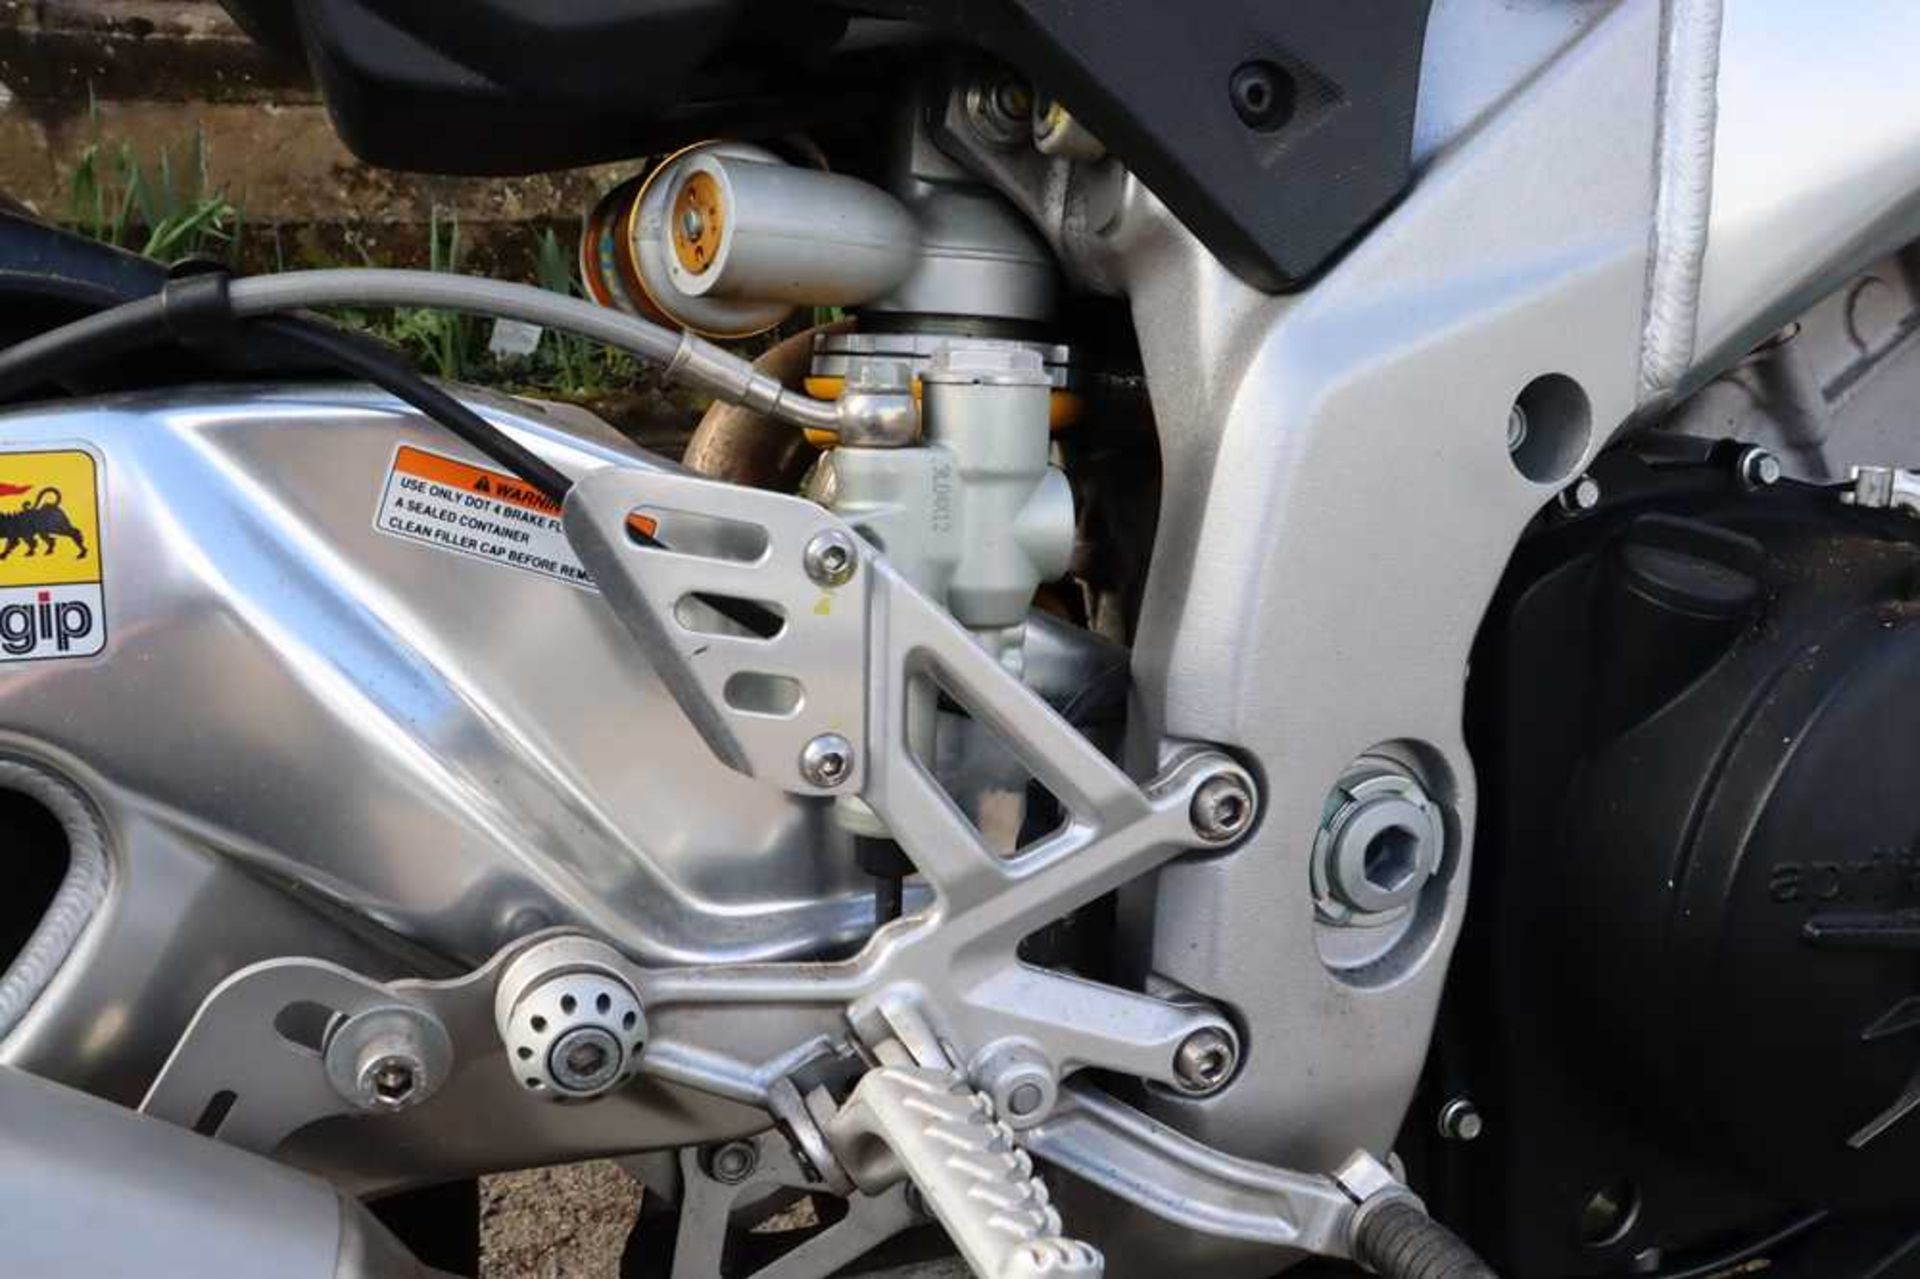 2010 Aprilia RSV4R Fitted with Moto GP style exhaust, original included - Image 31 of 44